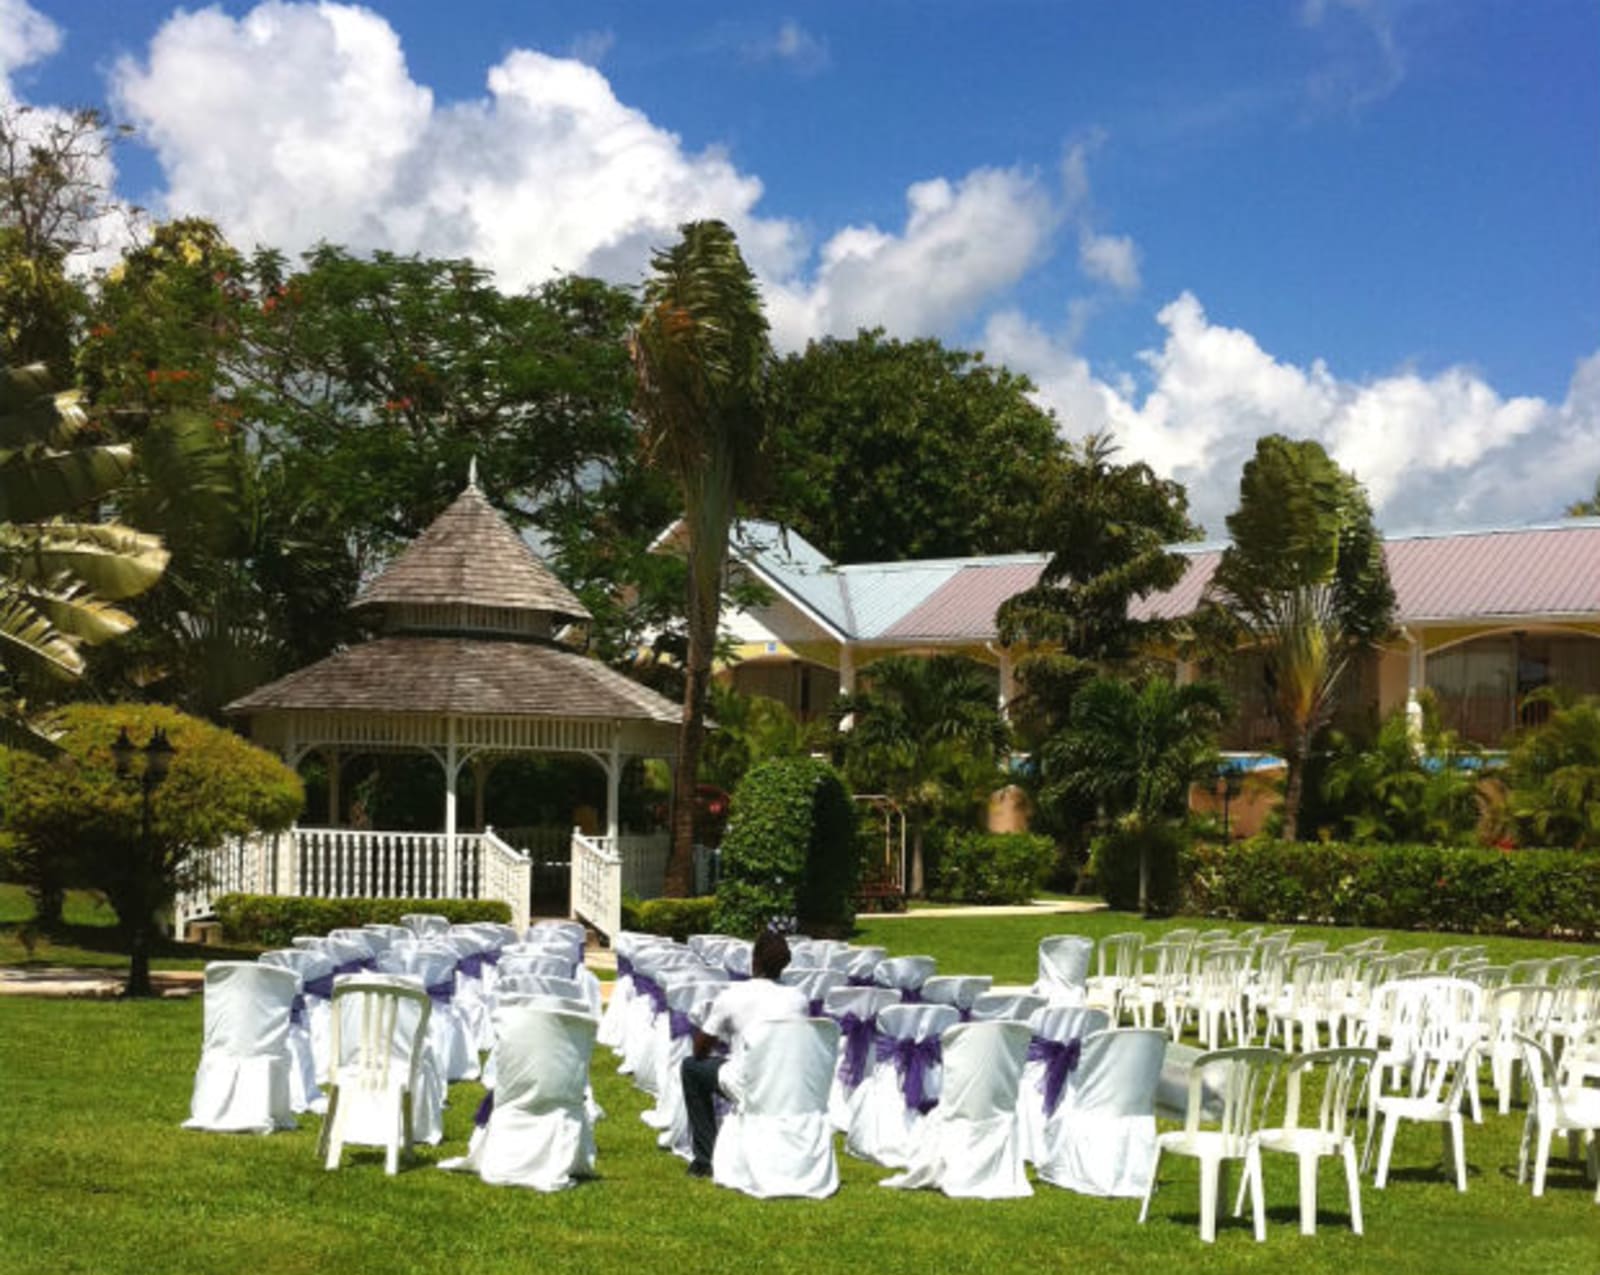 Wedding ceremony - white chairs setup pointing to a gazebo in a tree-lined field